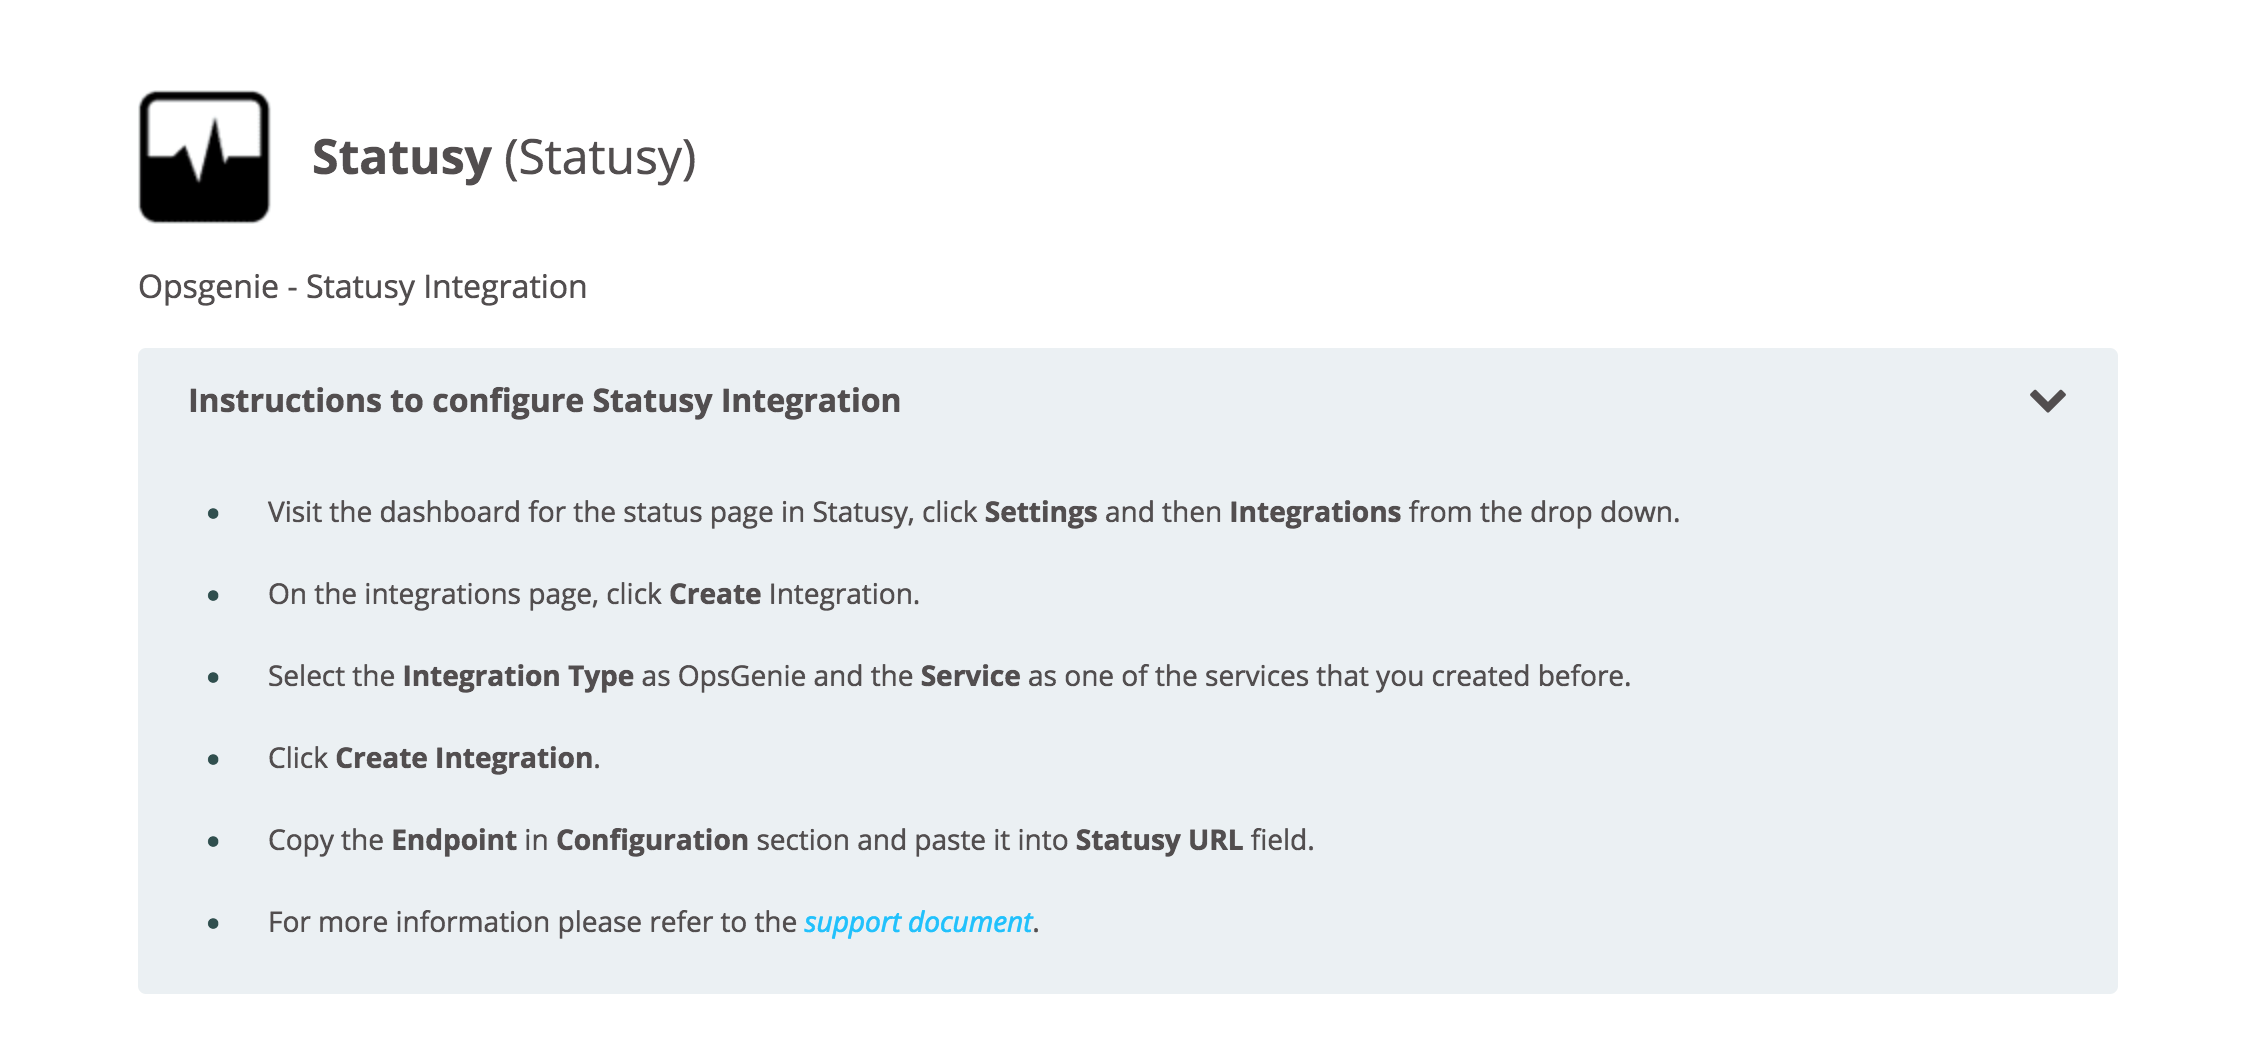 Instruction to configure Statusy integration